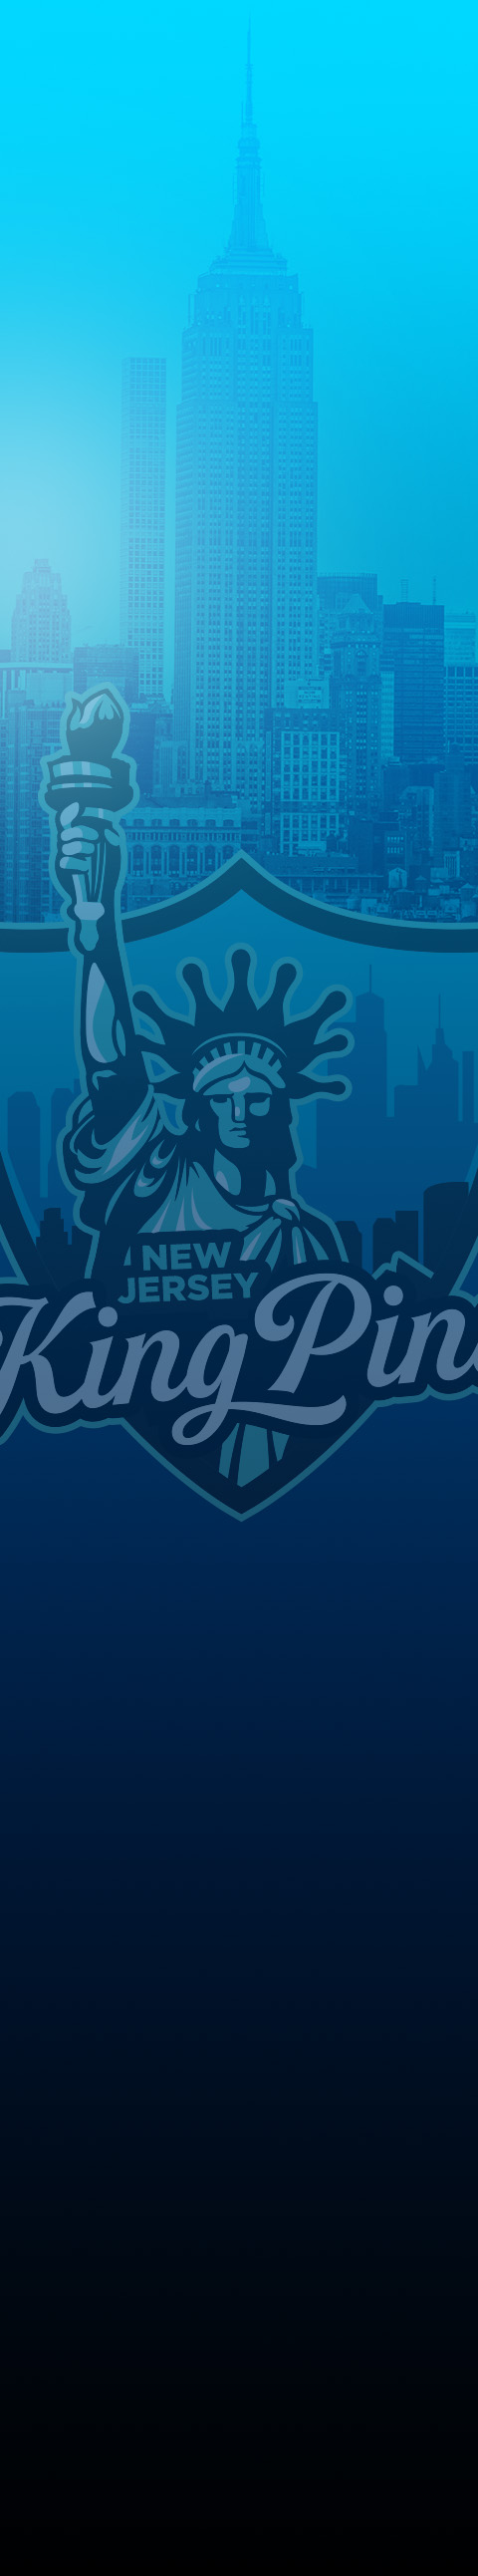 New Jersey Kingpins Logo in Front of New York Buildings